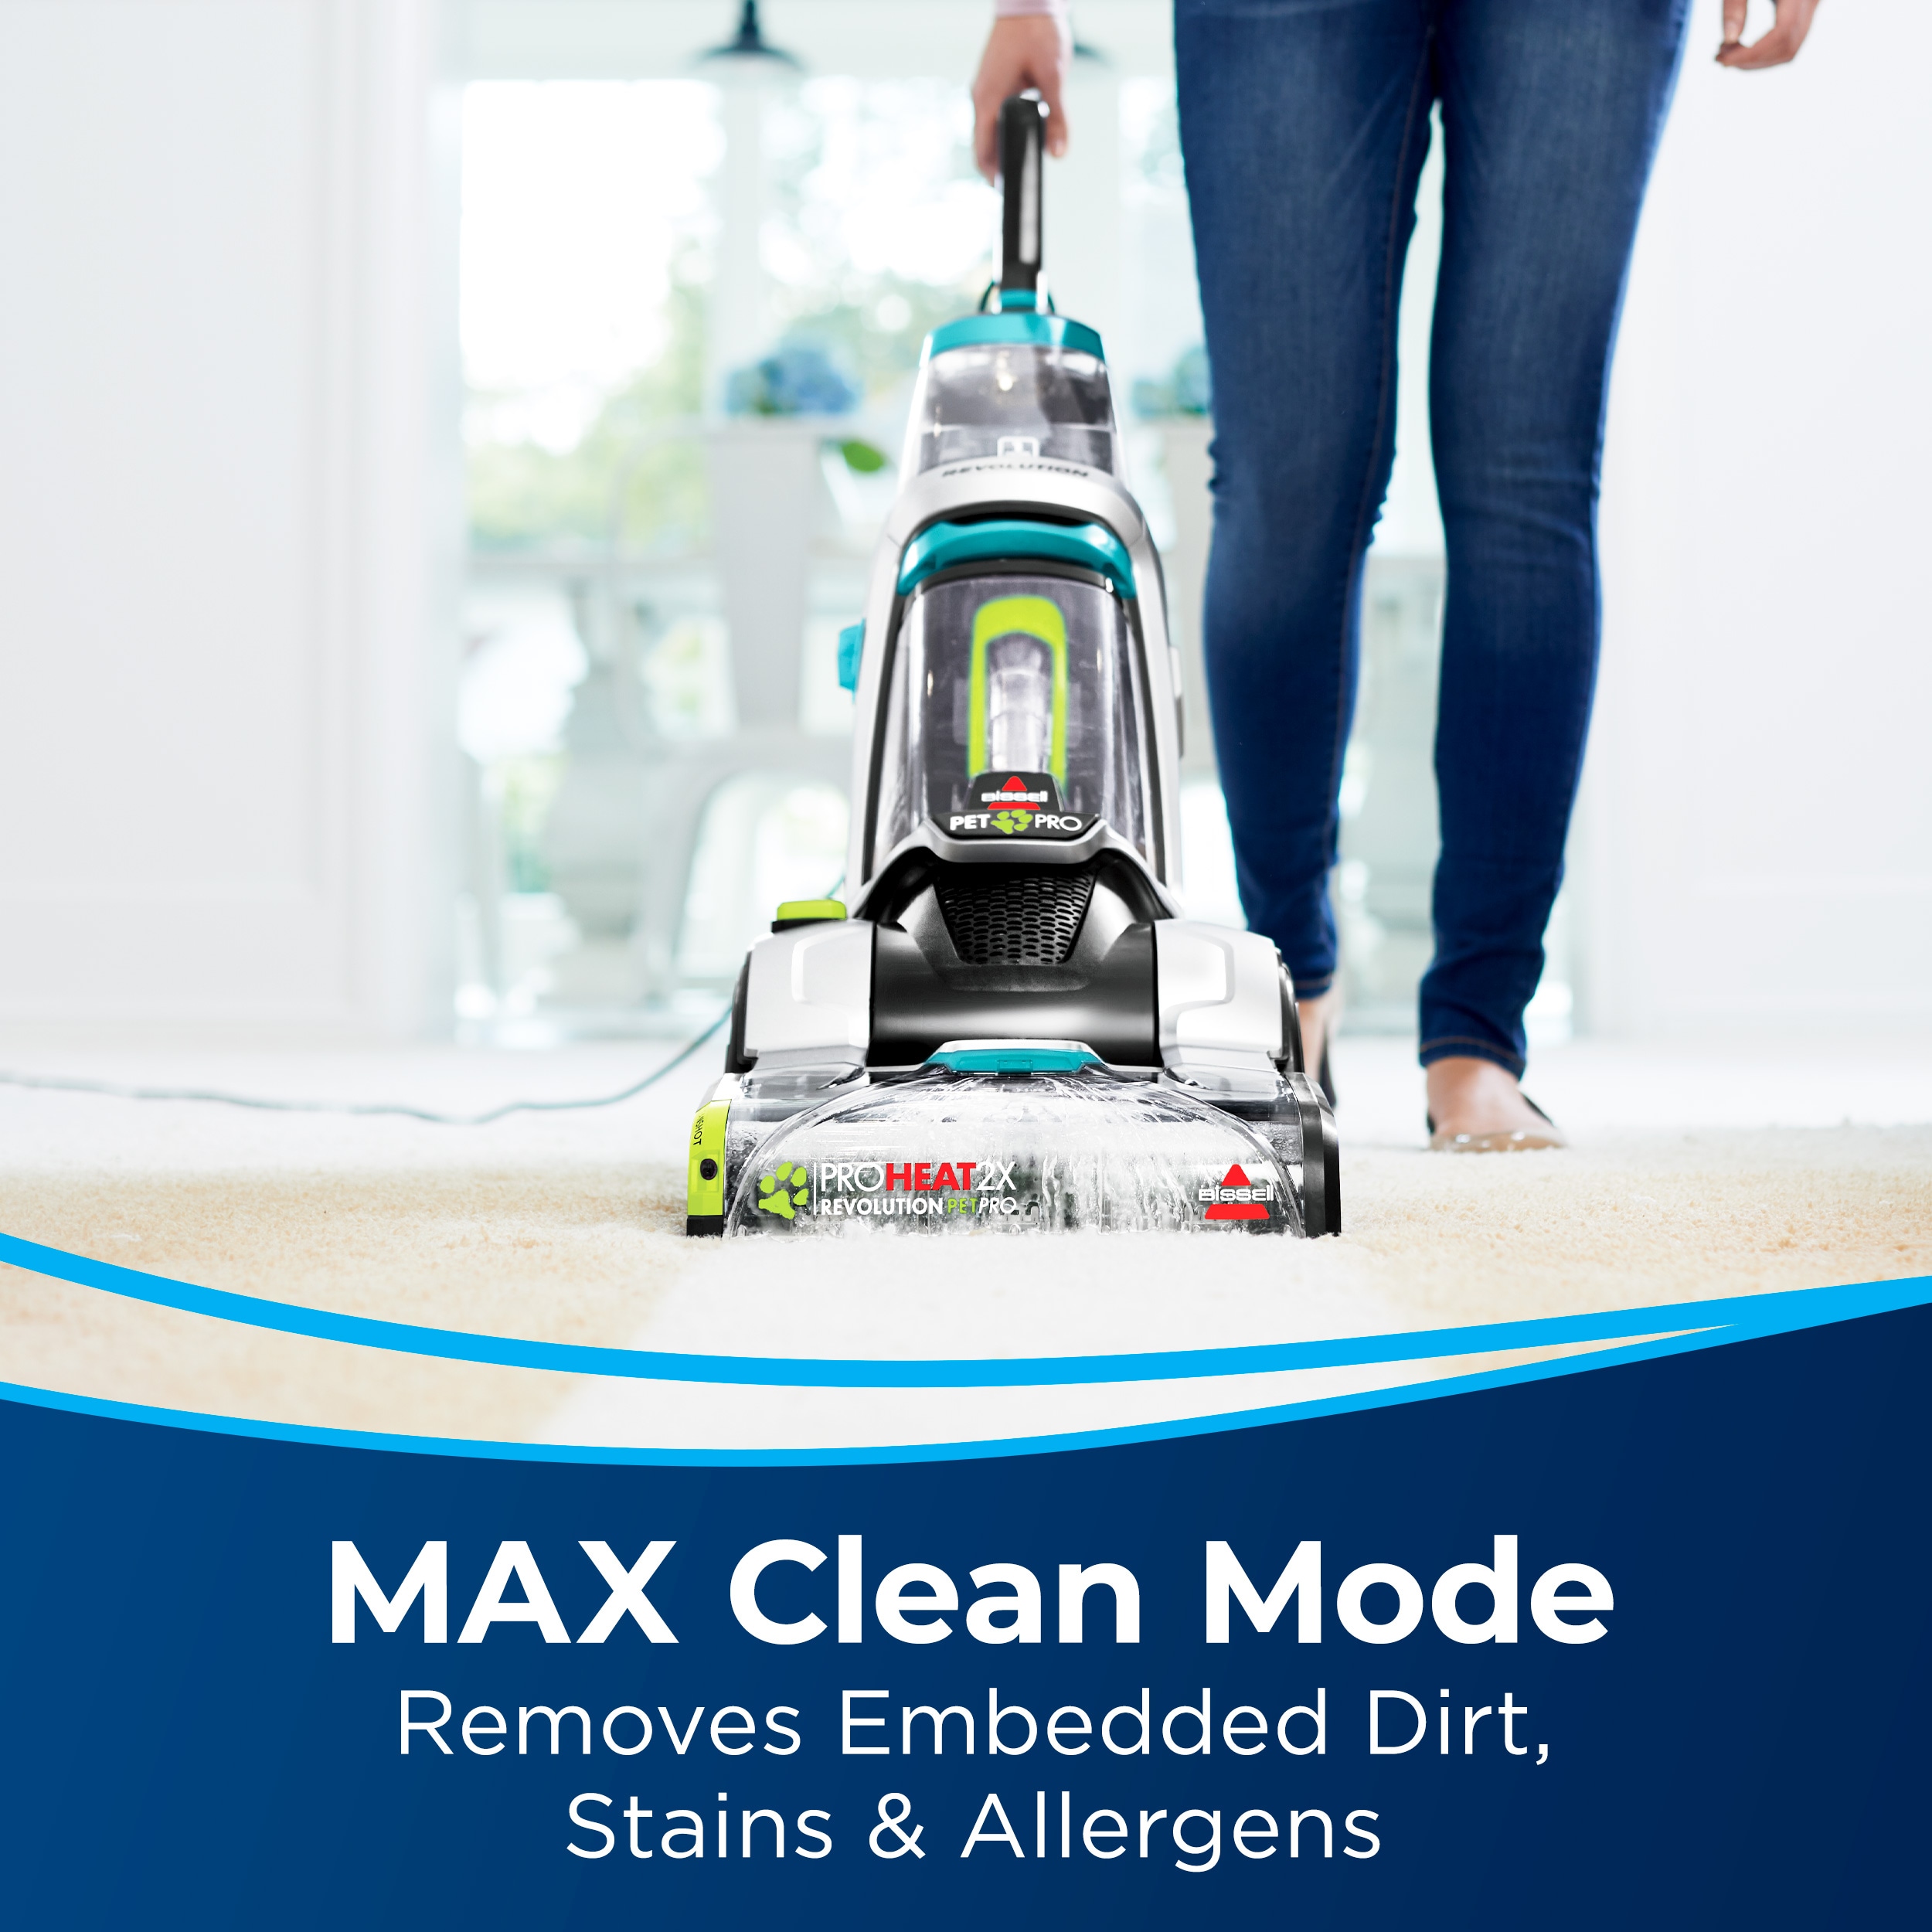 Carpet & Steam Cleaning at